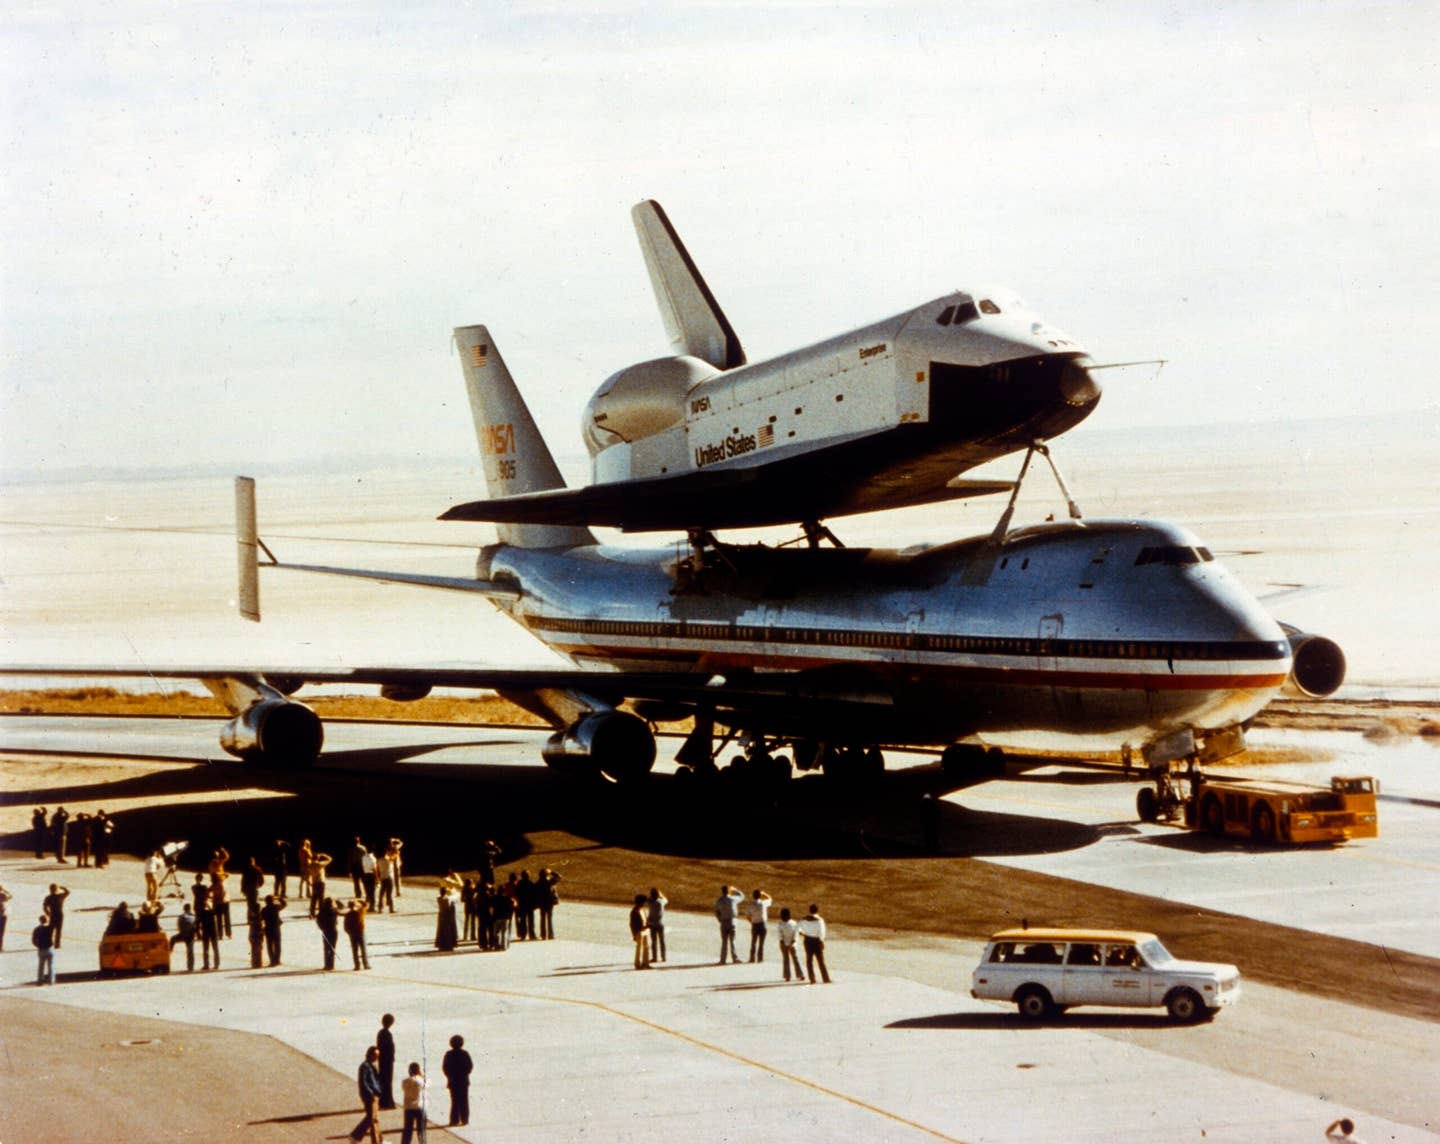 Roll-out of Space Shuttle Orbiter 'Enterprise', California, USA, 17 September 1976. The 'Enterprise' (OV-101) was built as part of NASA's Space Shuttle programme to perform atmospheric test flights after being launched from a modified Boeing 747 aircraft. OV-101, the first Space Shuttle orbiter, was built at the Palmdale manufacturing facilities in California. It was named the 'Enterprise' after the famous command of Captain James T Kirk, following a campaign by "Star Trek" fans. Its last flight was in 2012. Artist NASA. (Photo by Heritage Space/Heritage Images/Getty Images)